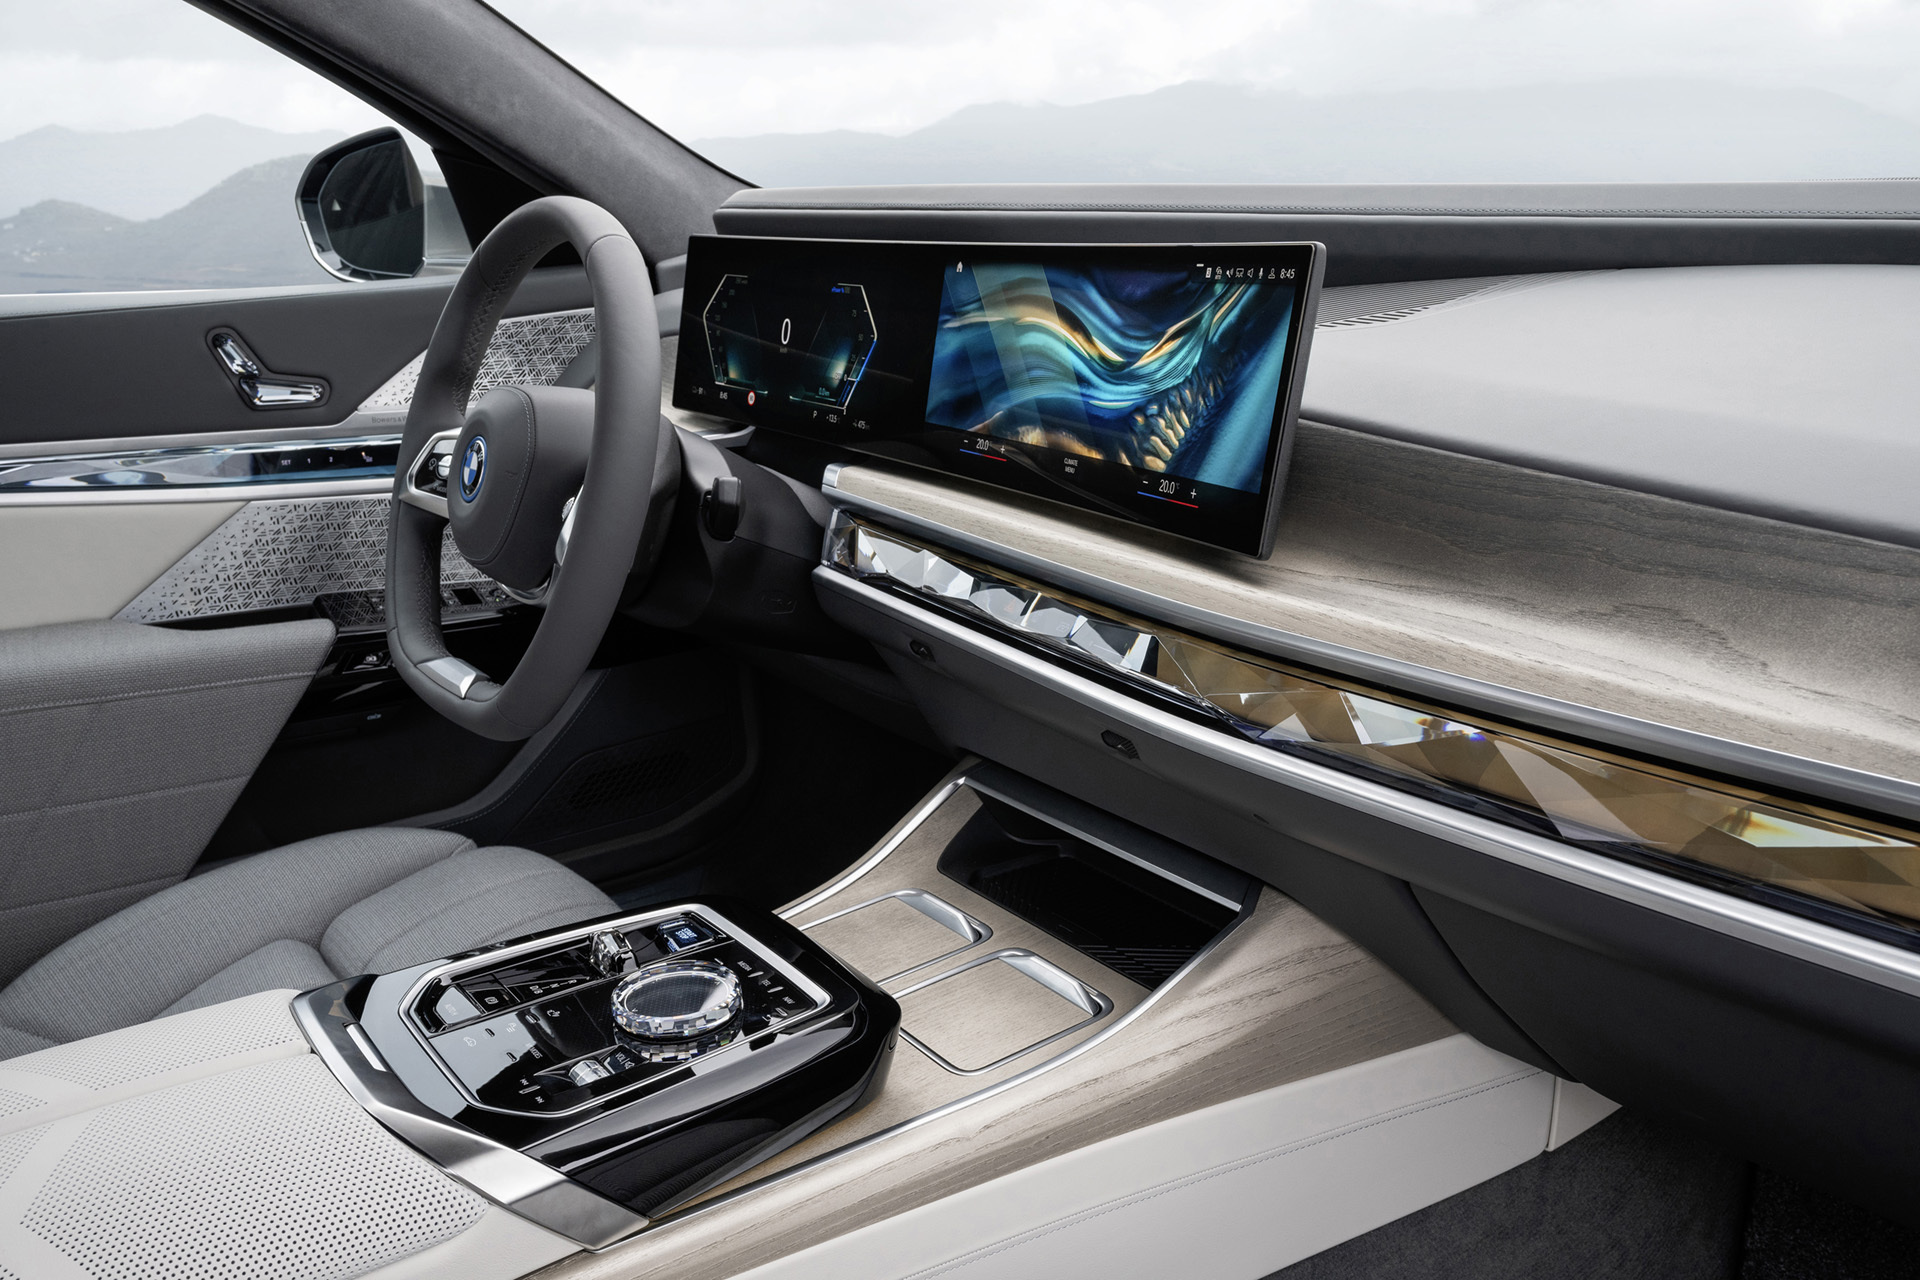 Thanks to the new BMW Interaction Bar, the dashboard presents itself as minimalistic and with a high dose of innovation